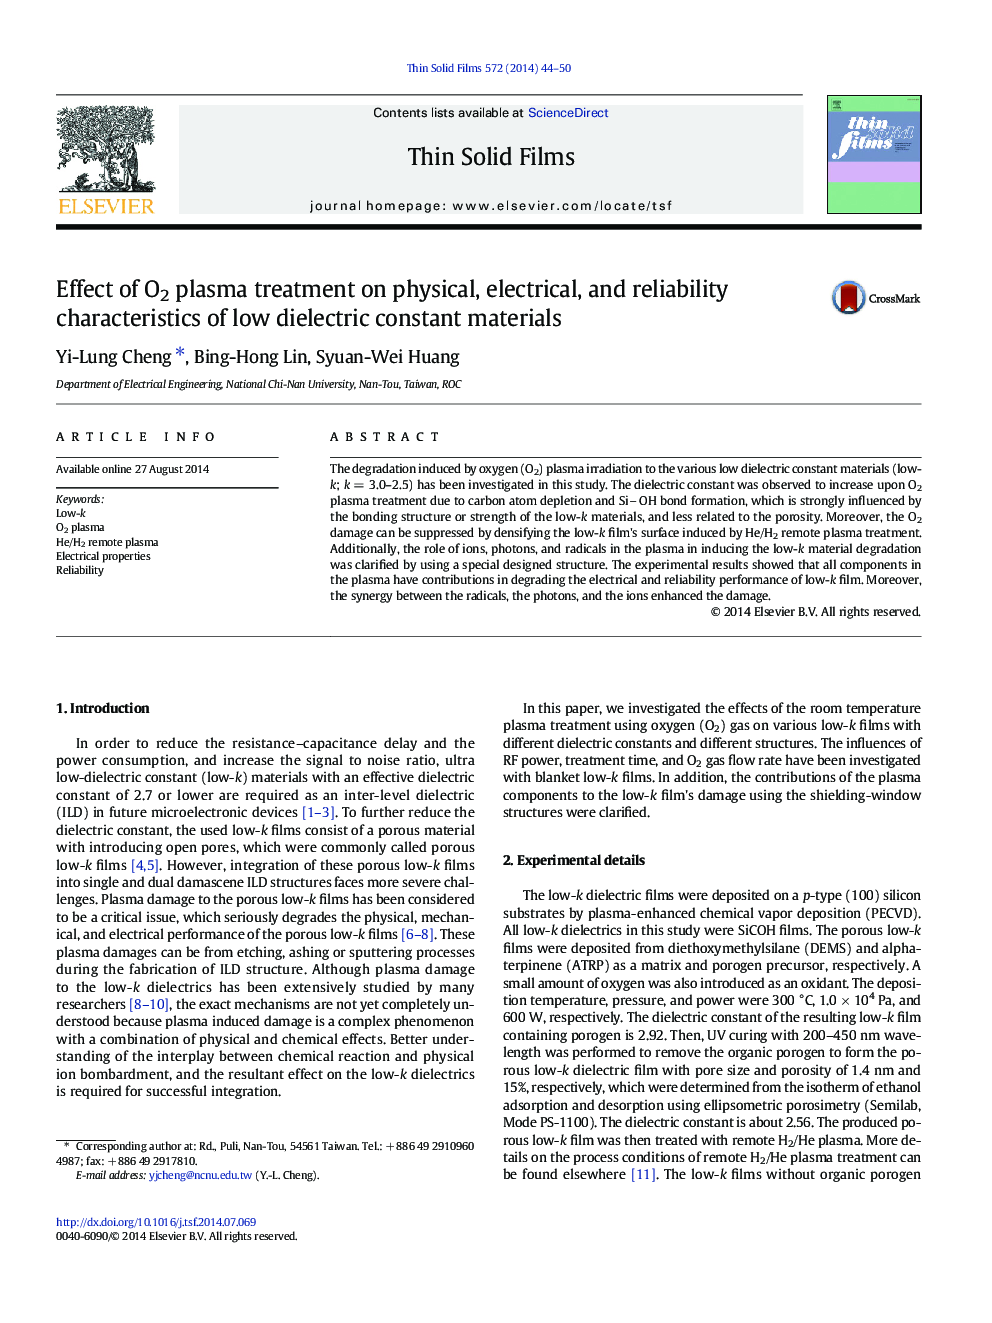 Effect of O2 plasma treatment on physical, electrical, and reliability characteristics of low dielectric constant materials